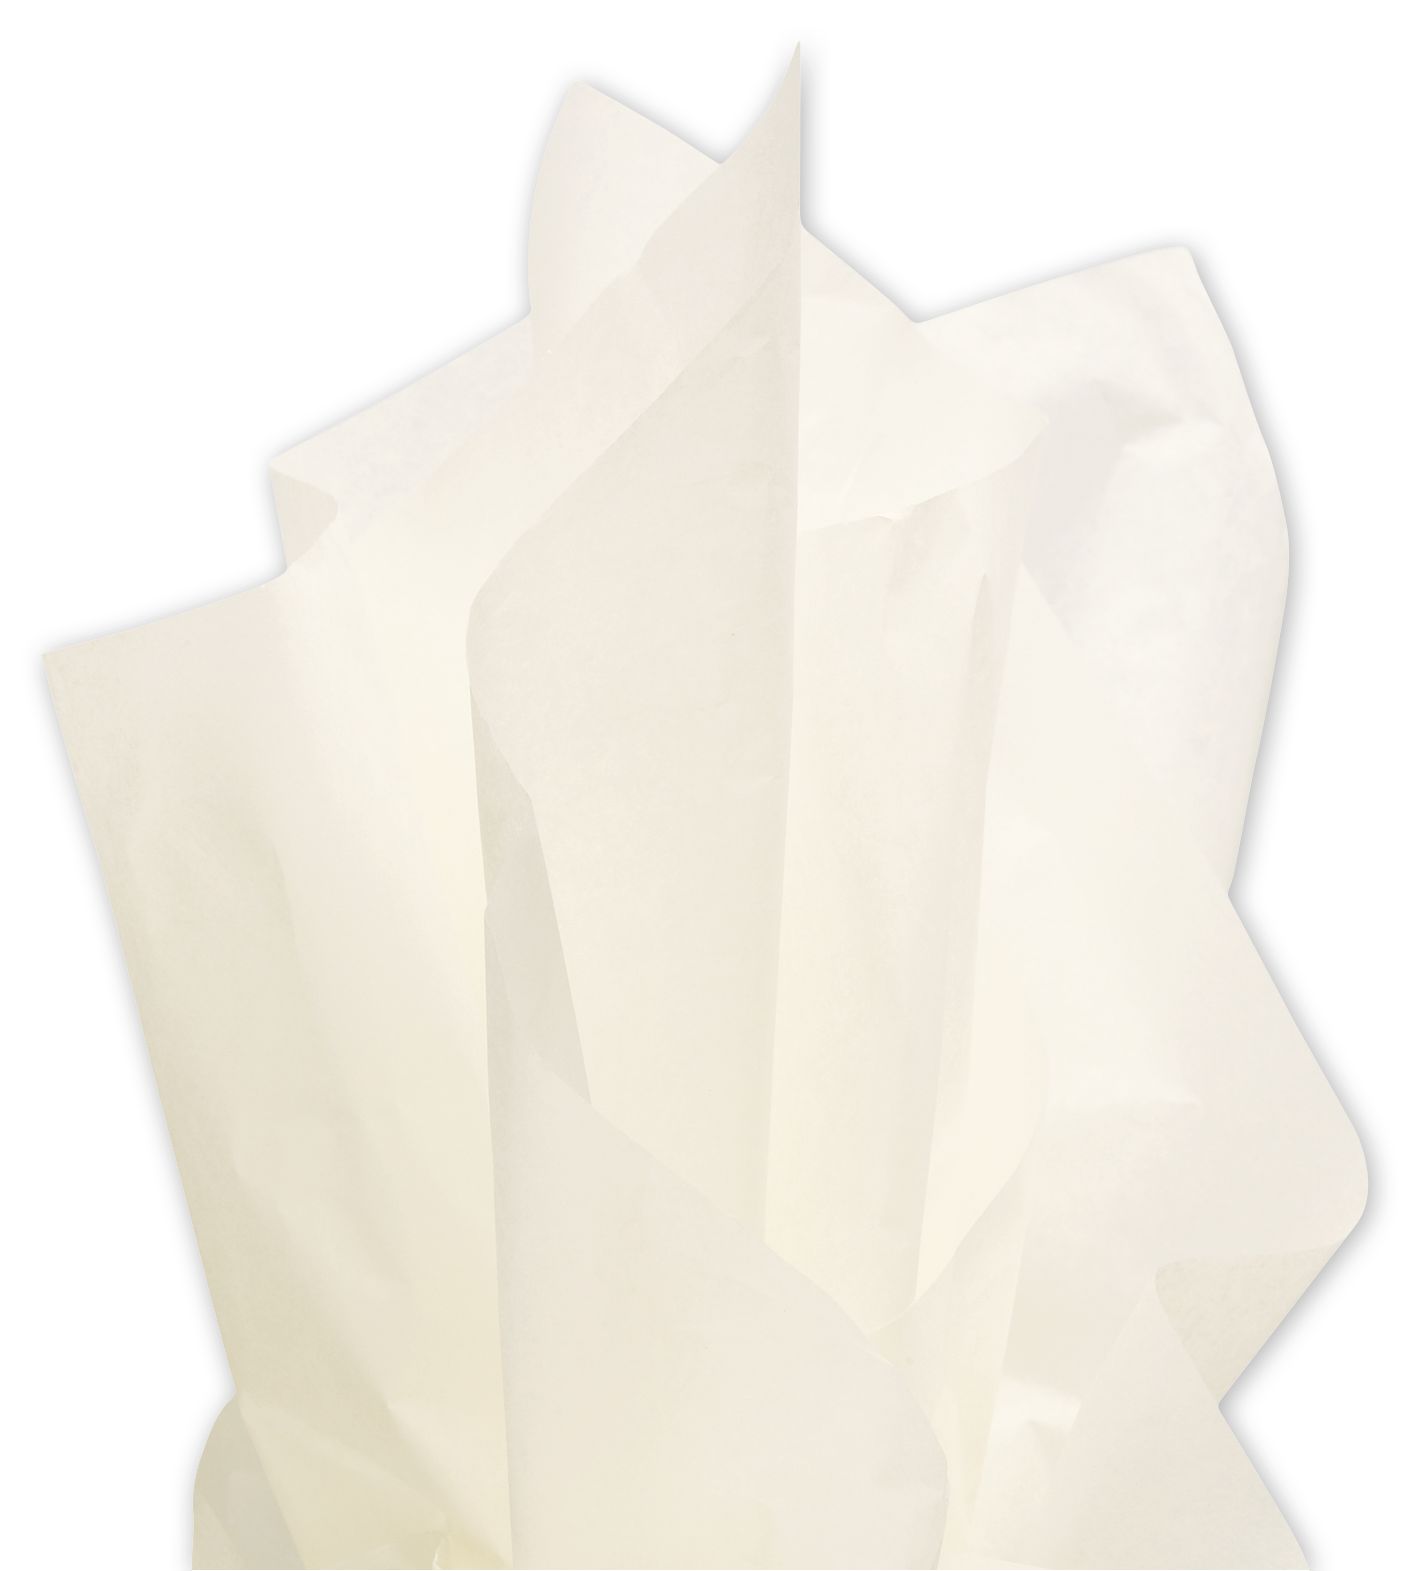 Dress up your gifts with this vibrant solid ivory tissue paper. Mix and match with colors or patterns for added style.